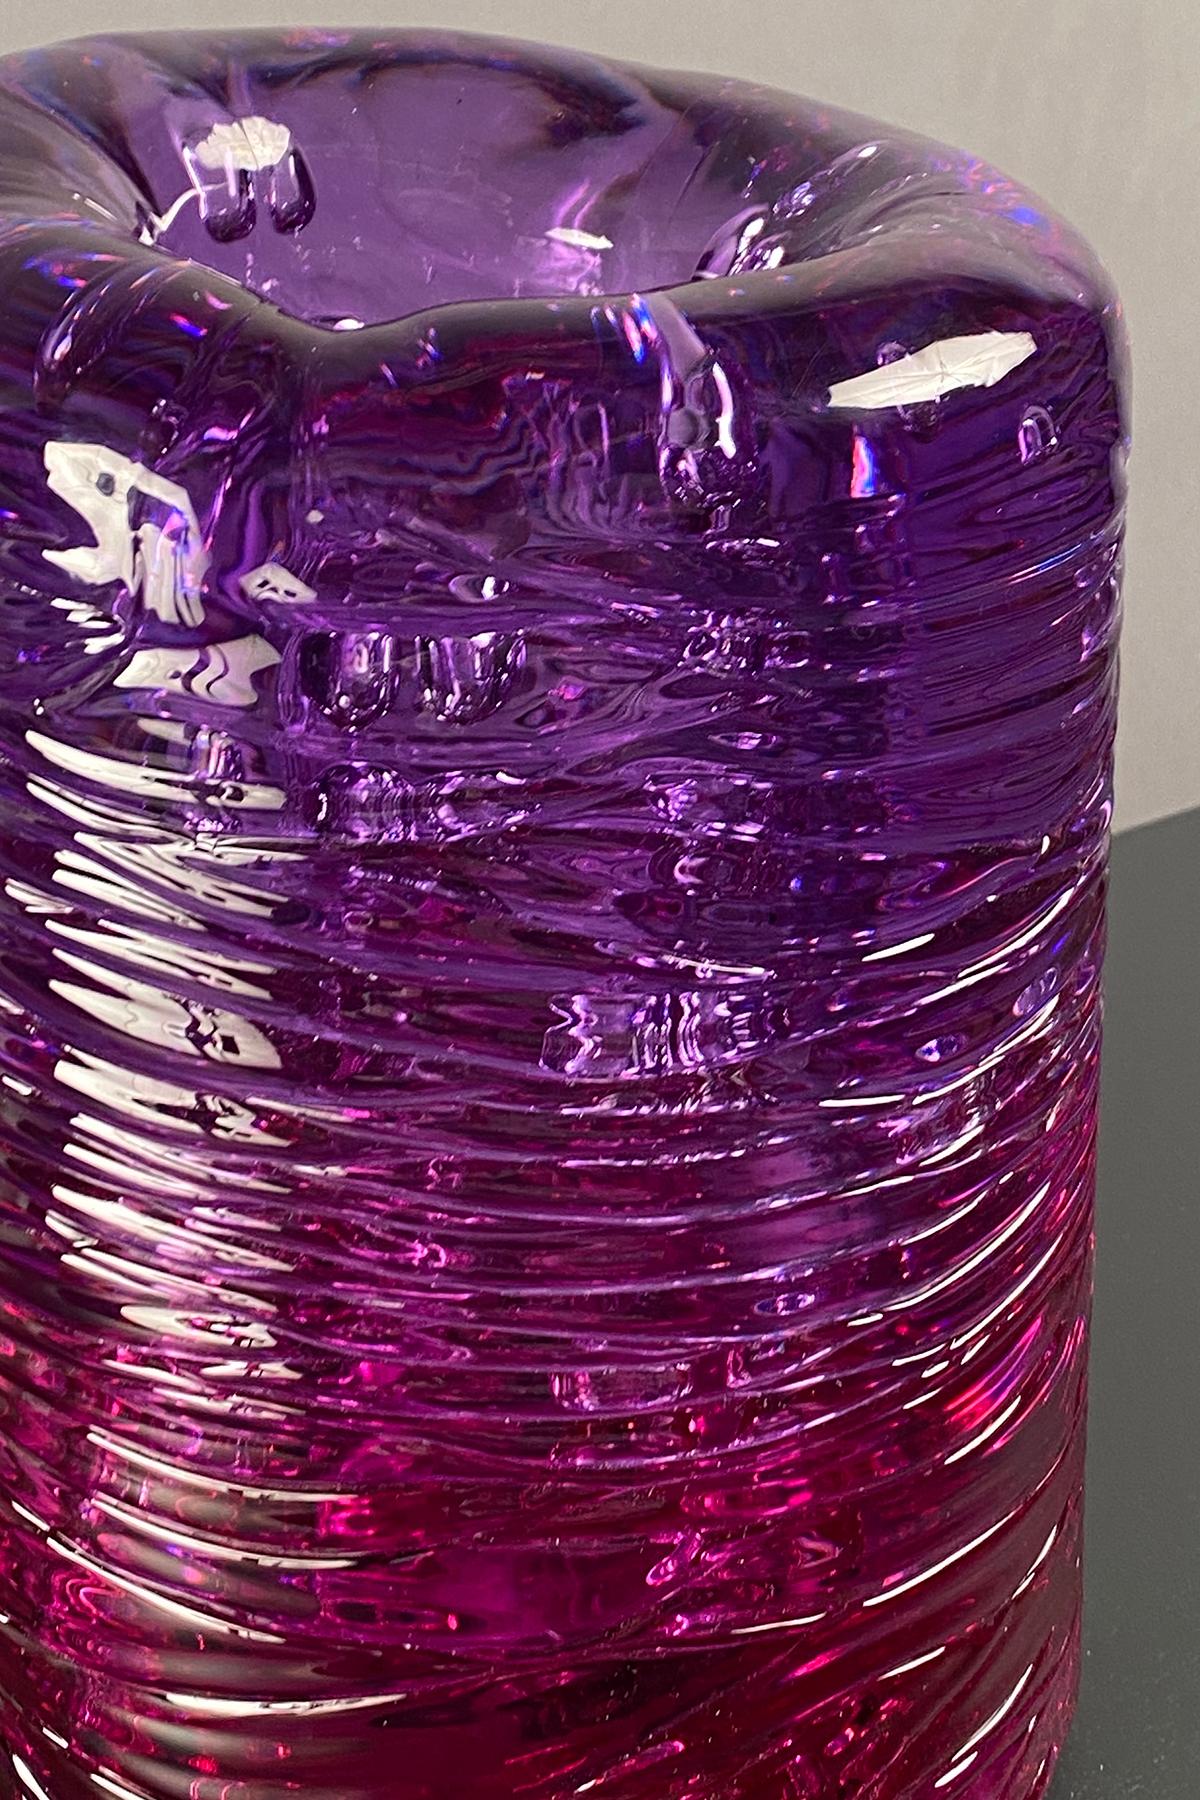 Transparent-violet methacrylate vase with air bubble inclusions throughout. Custom color combinations available.